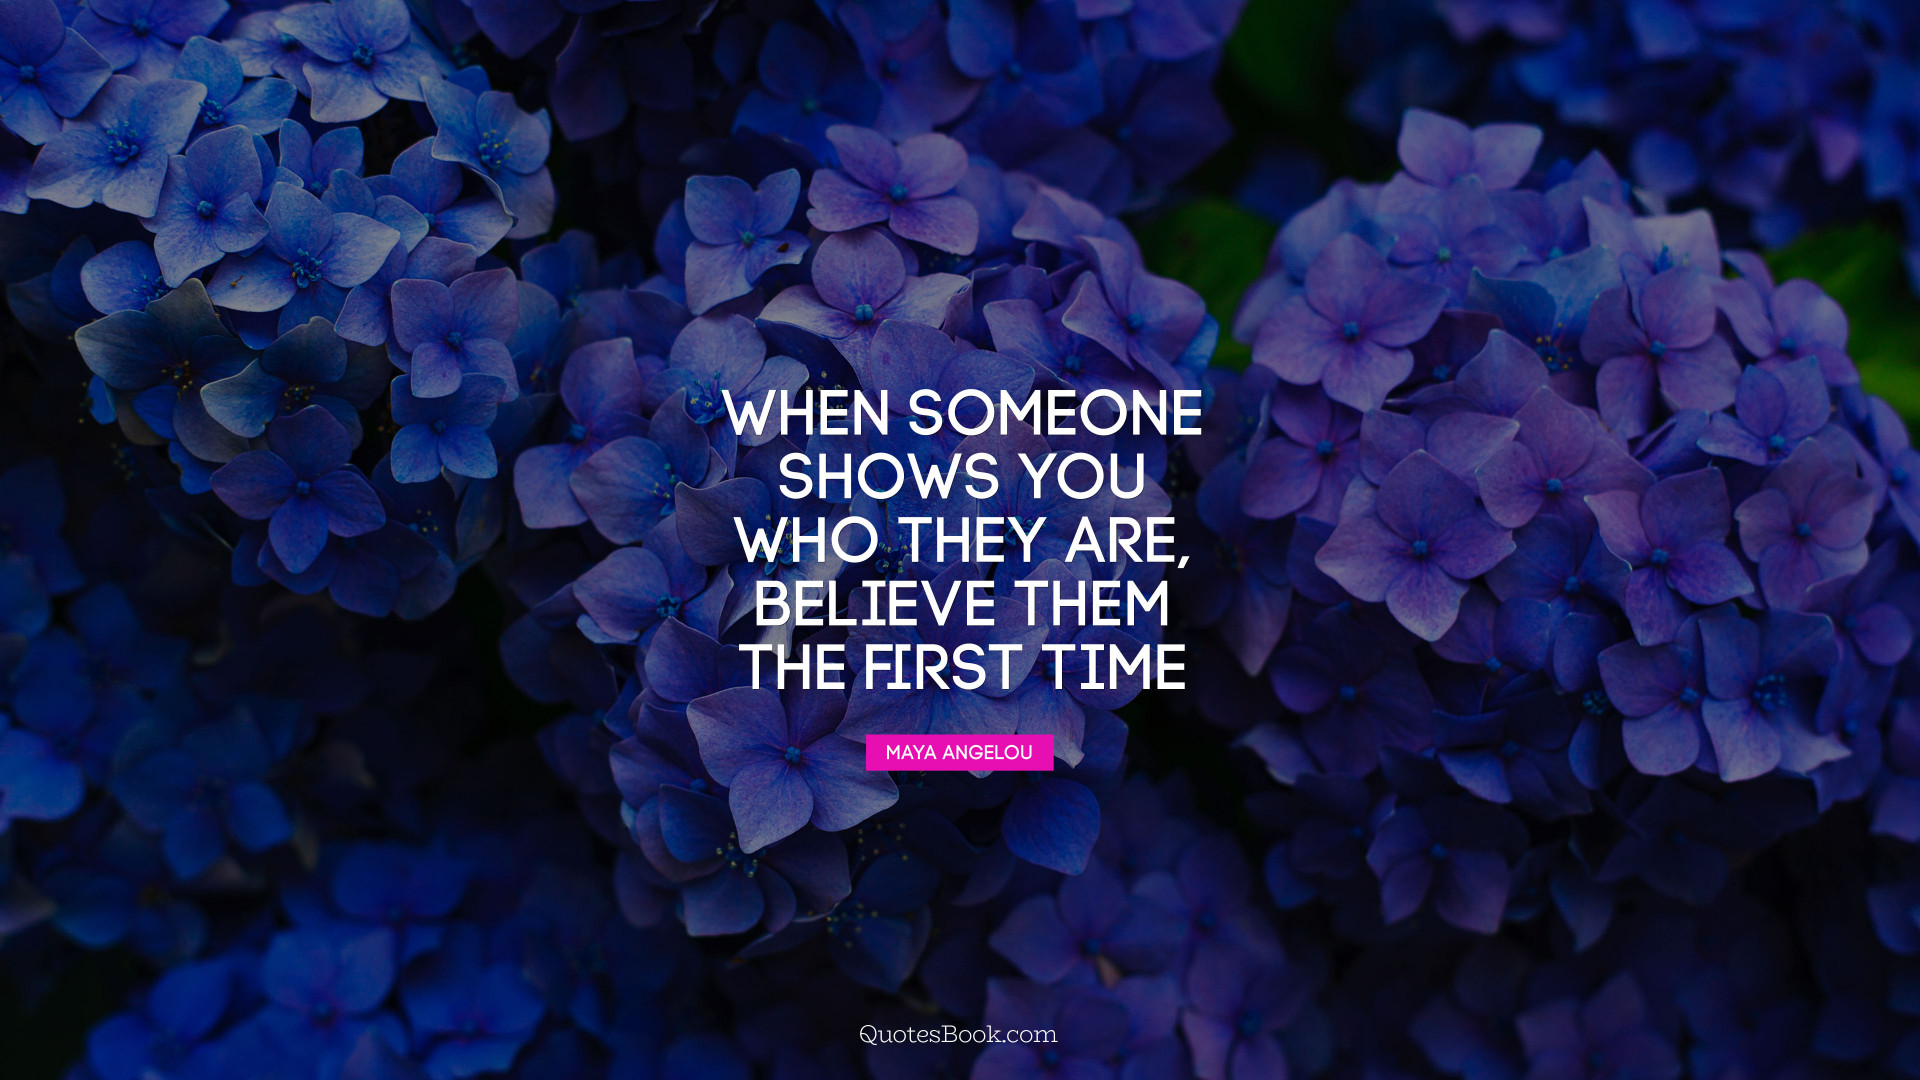 When someone shows you who they are, believe them the first time